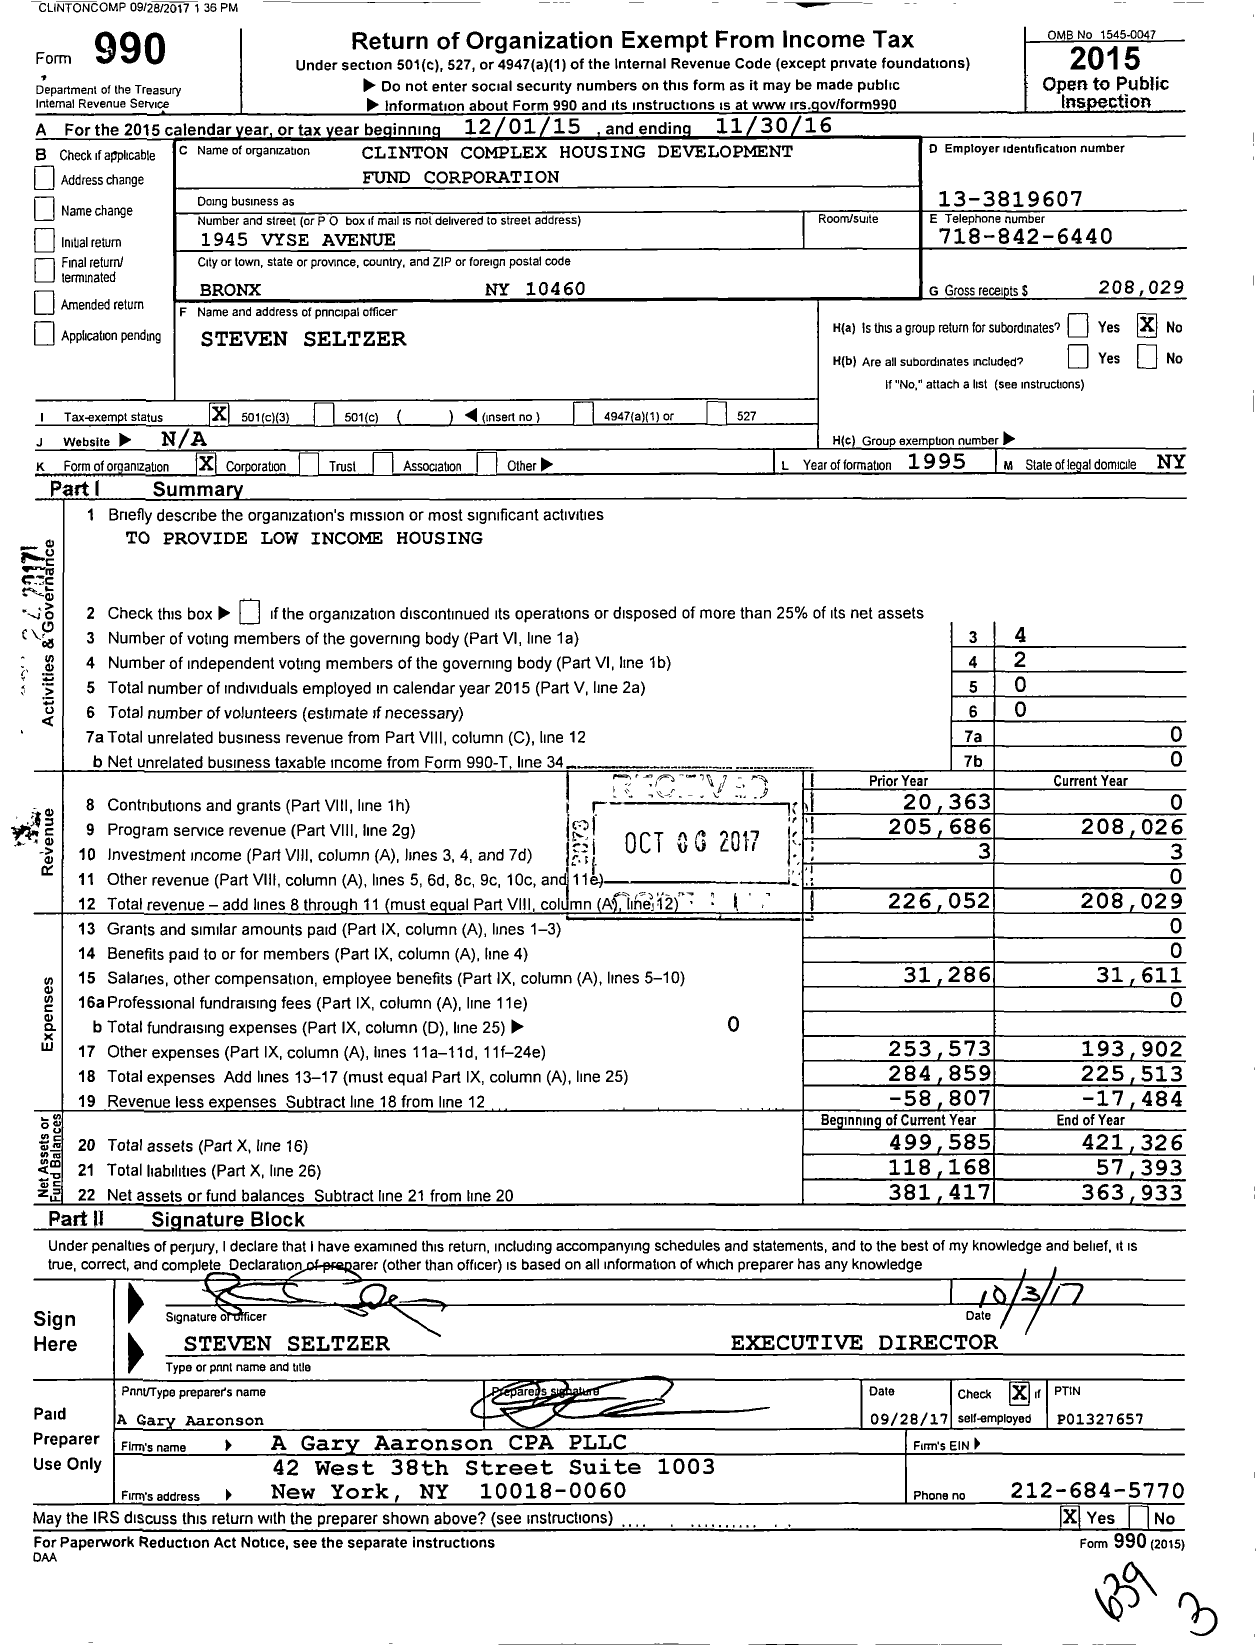 Image of first page of 2015 Form 990 for Clinton Complex Housing Development Fund Corporation